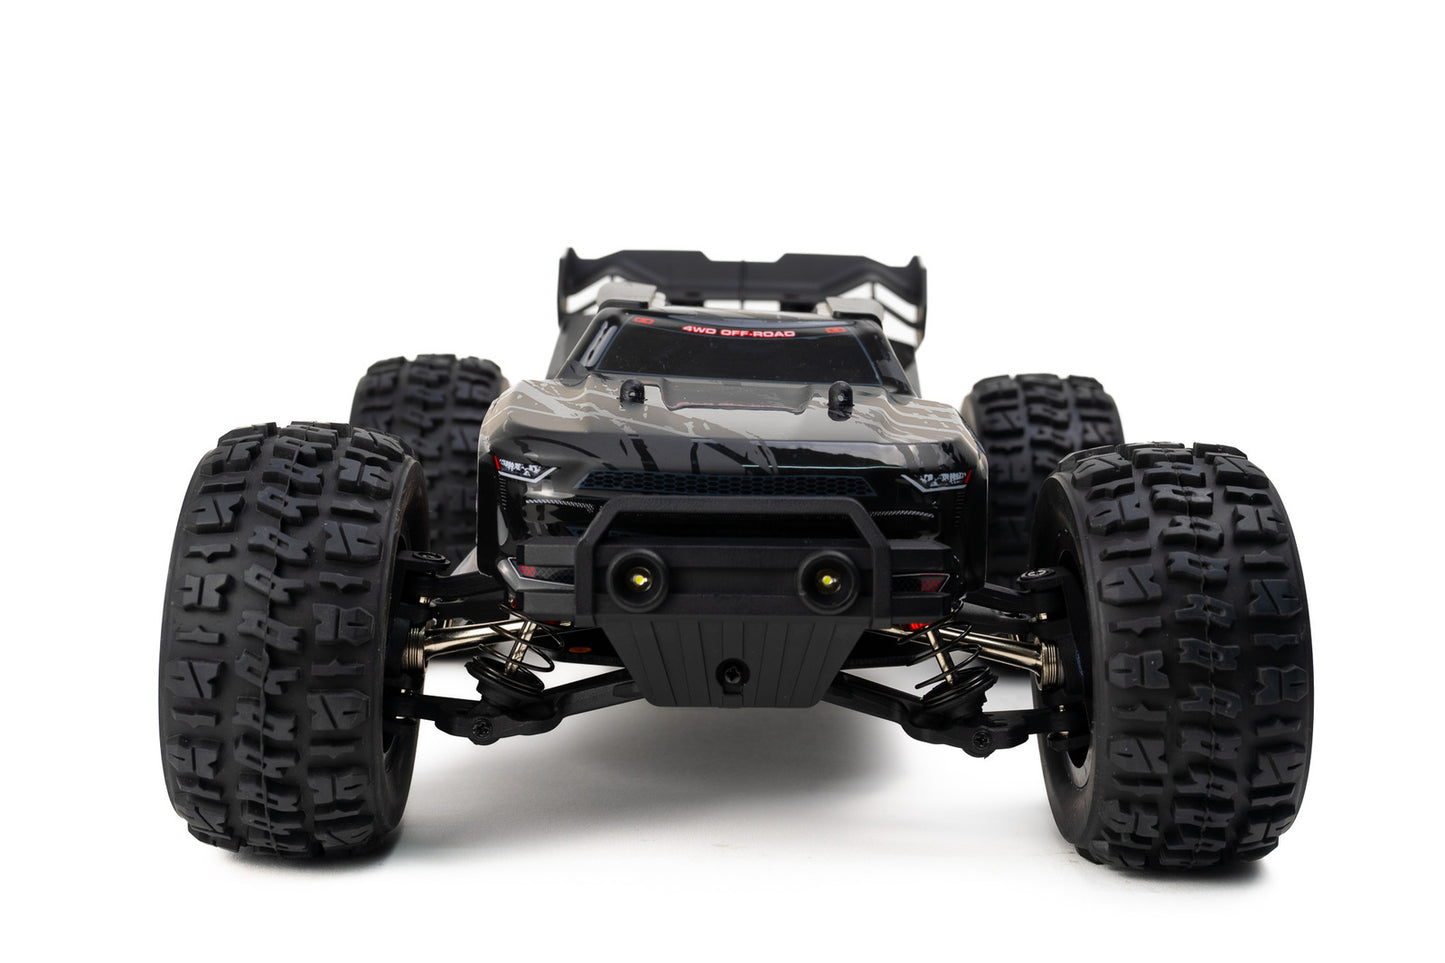 MJX 1/14 Hyper Go 4WD High-speed Off-road Brushless RC Truggy  MJX-14210